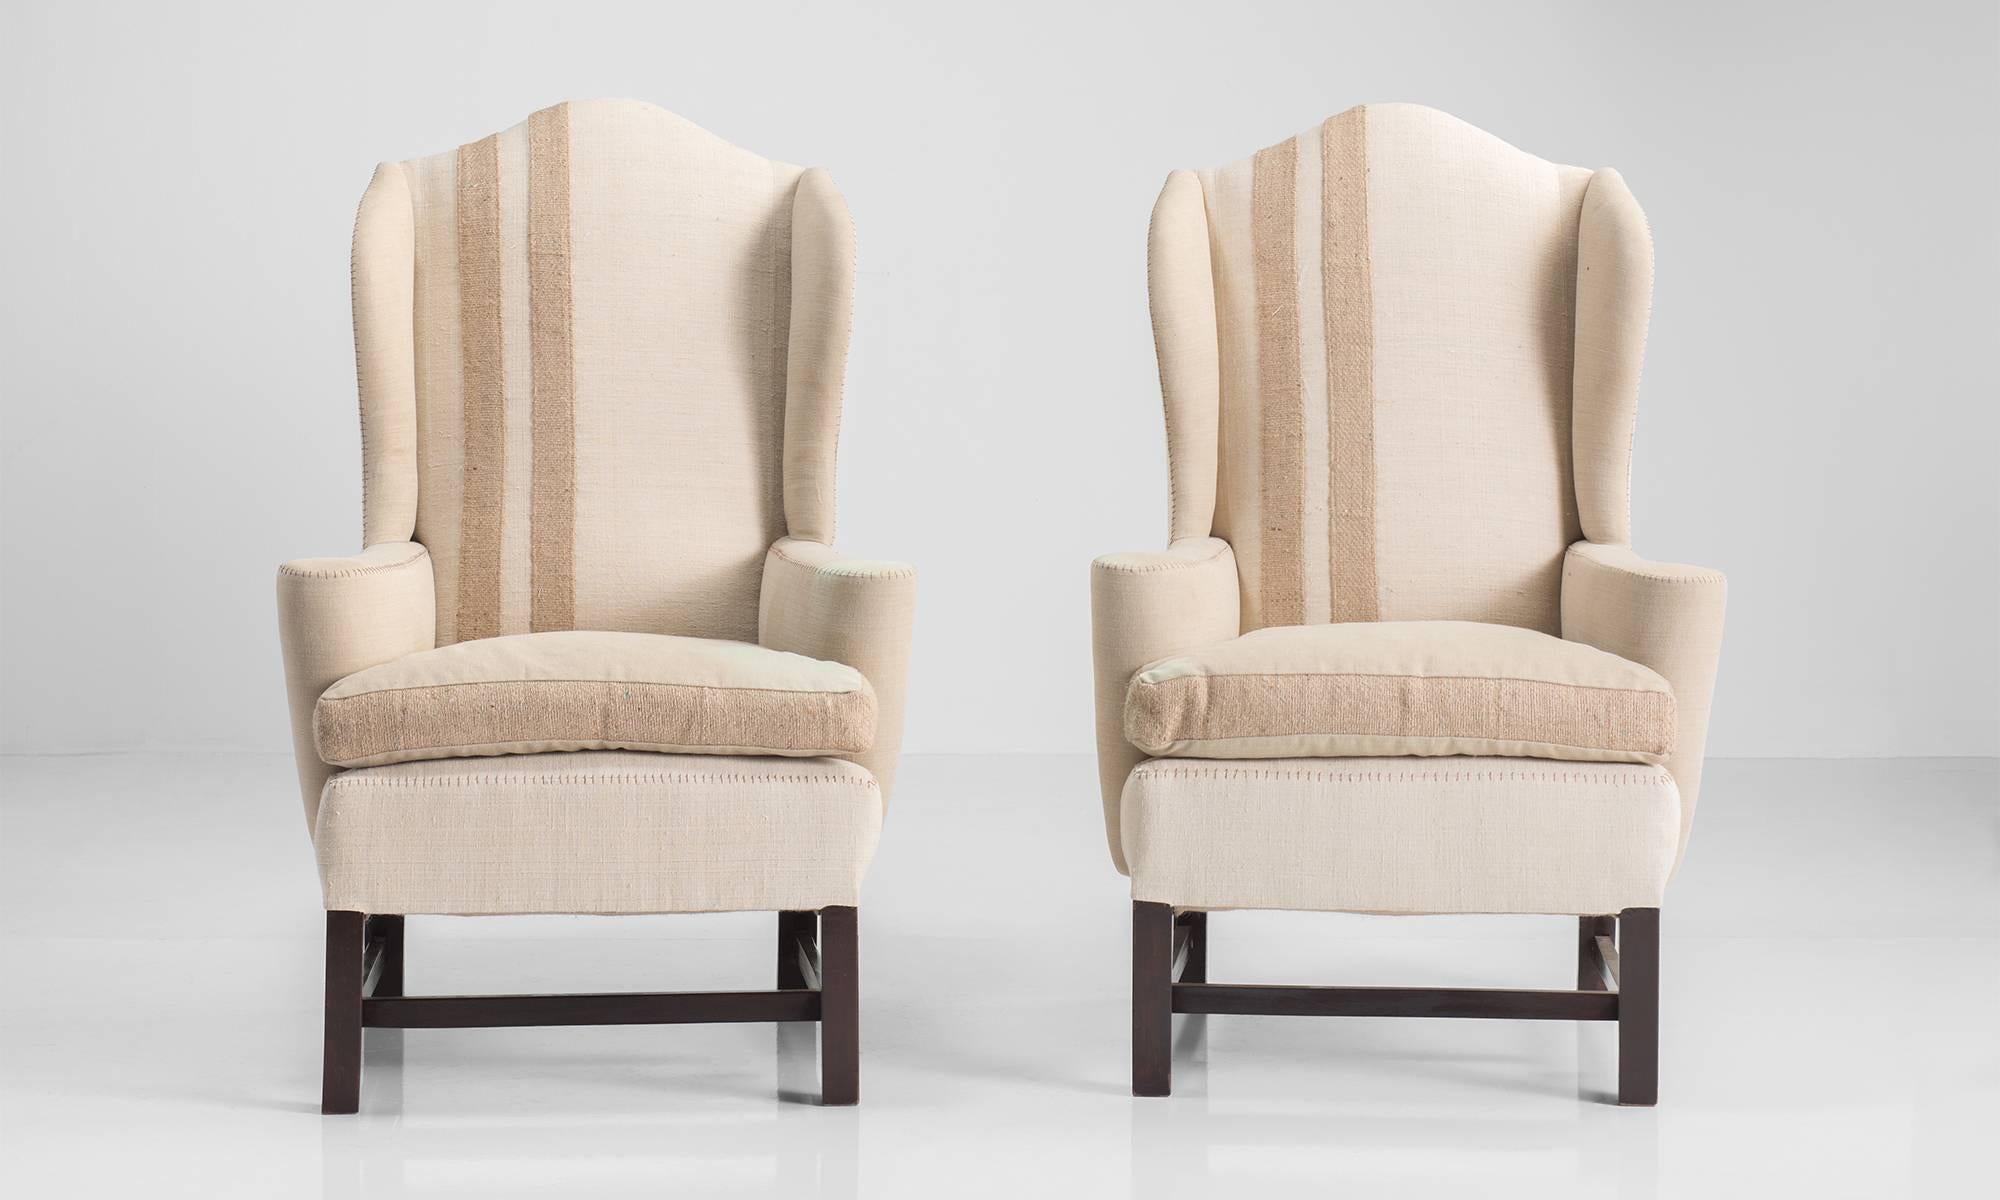 Pair of Upholstered Wingback Chairs, circa 1950

Classic form reupholstered in cotton with exposed stitching details. 